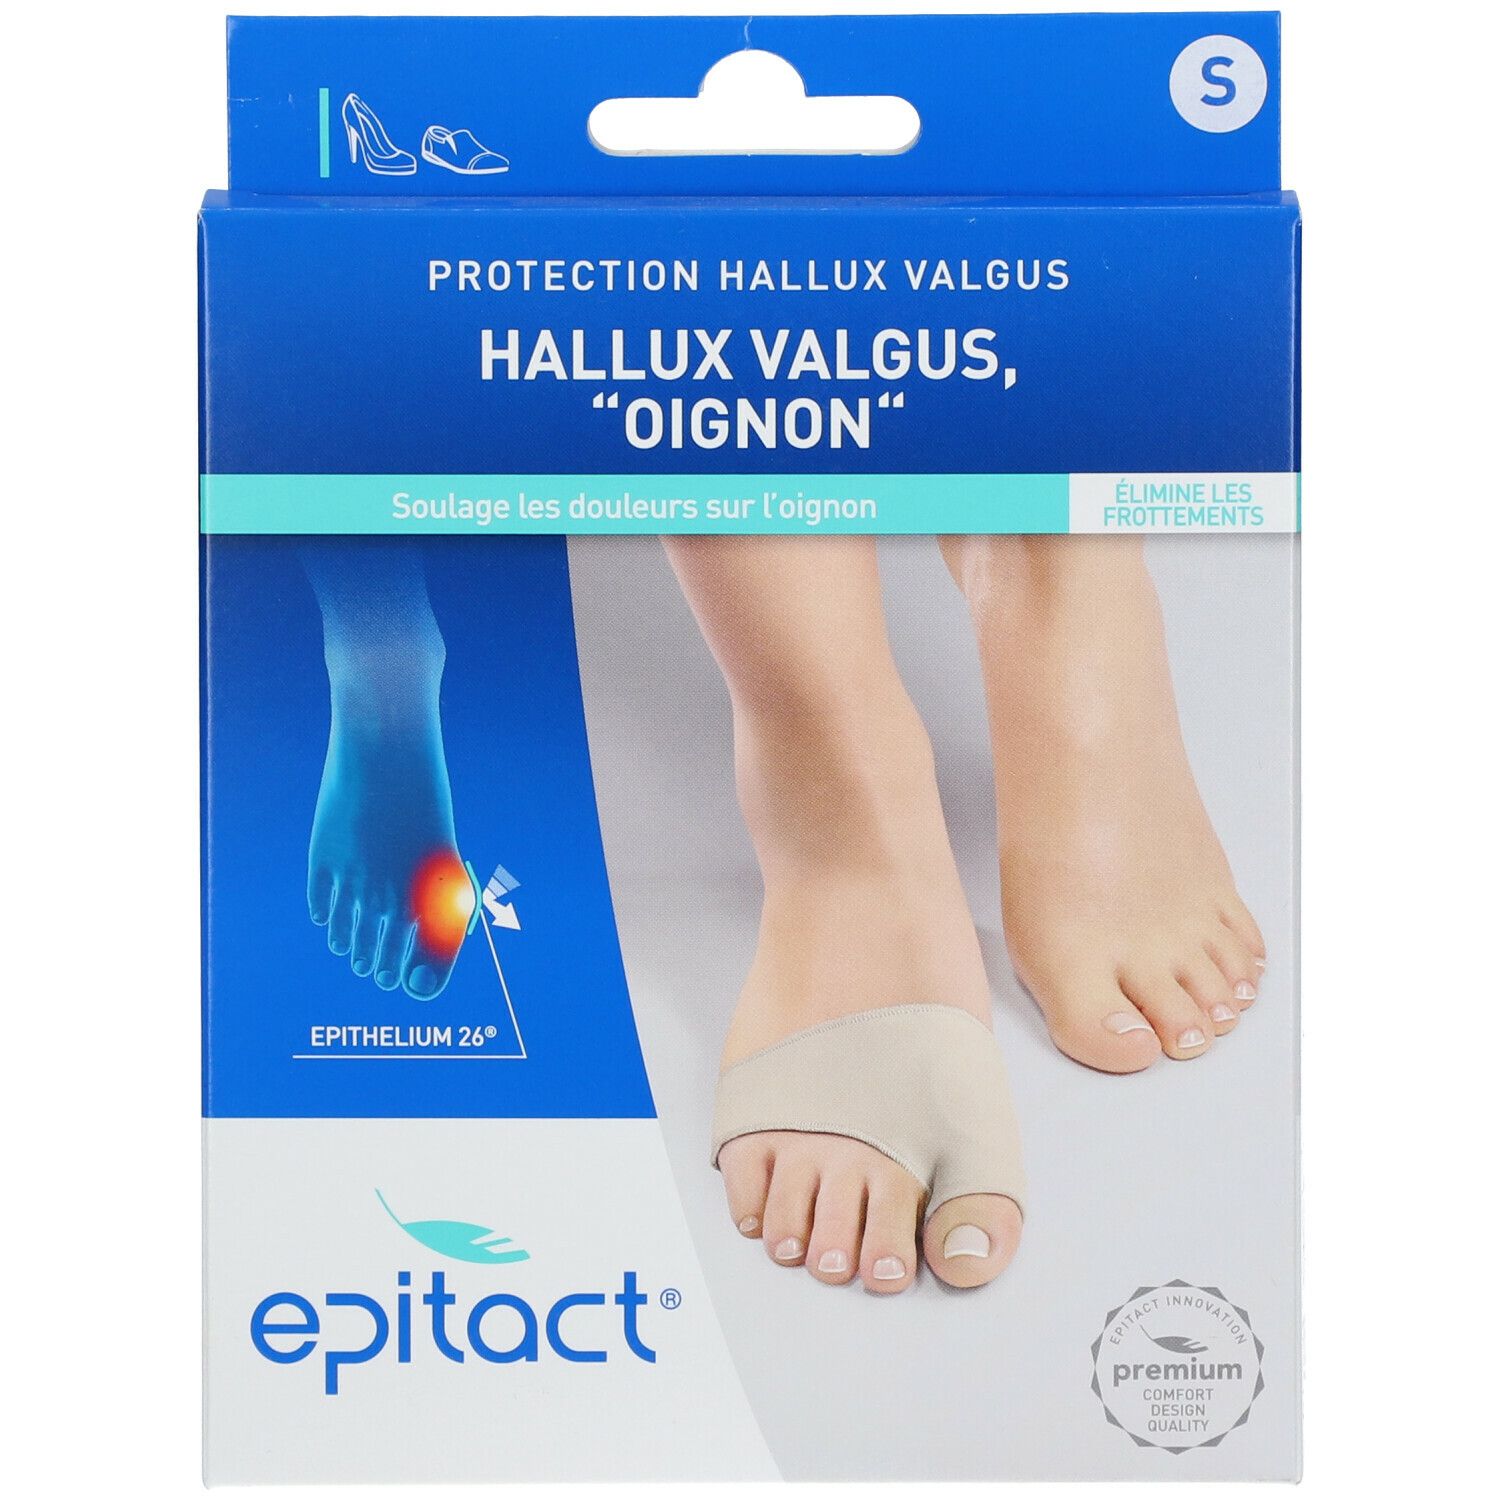 MILLET INNOVATION epitact® Protection Hallux Valgus S